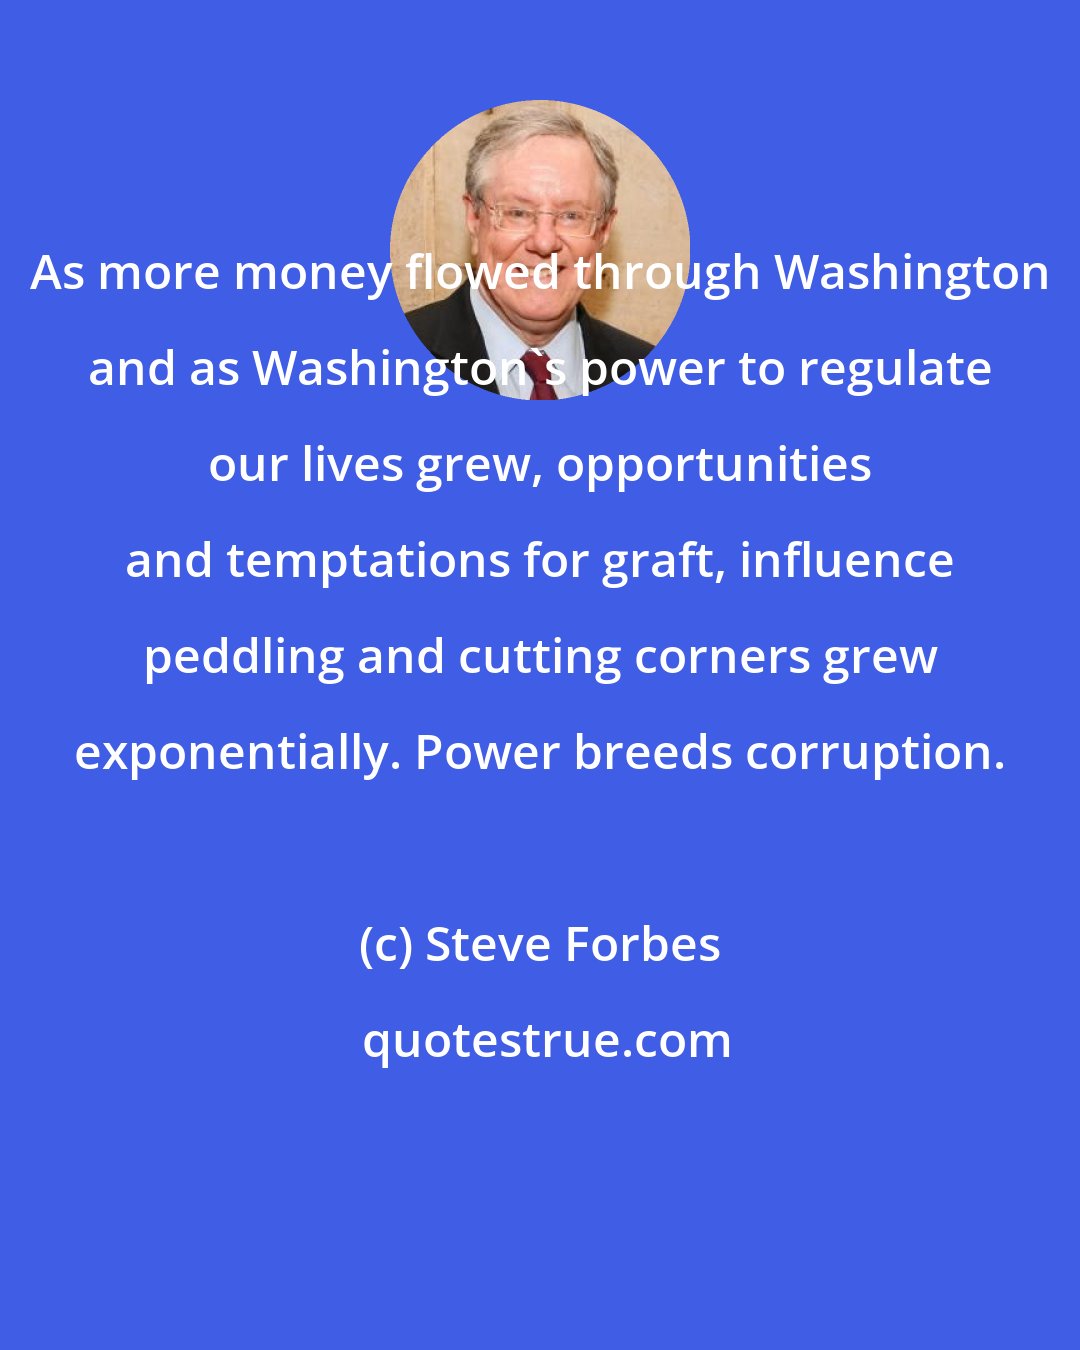 Steve Forbes: As more money flowed through Washington and as Washington's power to regulate our lives grew, opportunities and temptations for graft, influence peddling and cutting corners grew exponentially. Power breeds corruption.